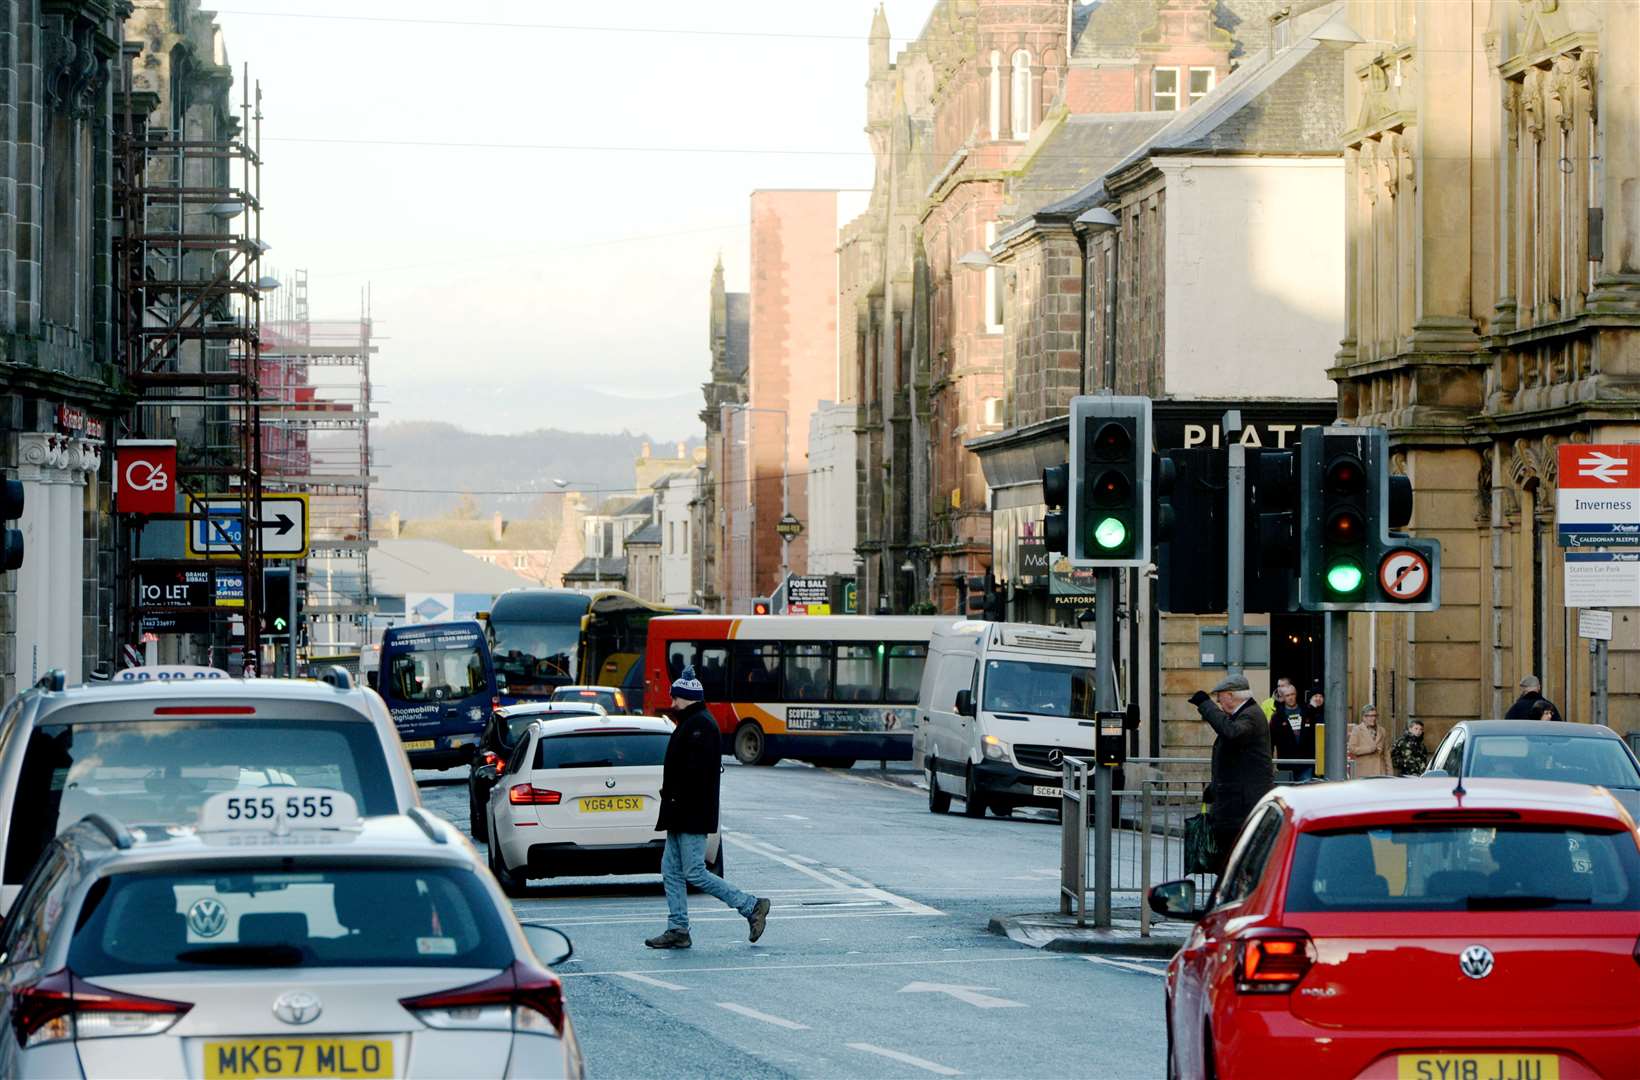 City councillors are due to decide on Monday whether to progress plans for measures that aim to reduce traffic on Academy Street. Picture: James MacKenzie